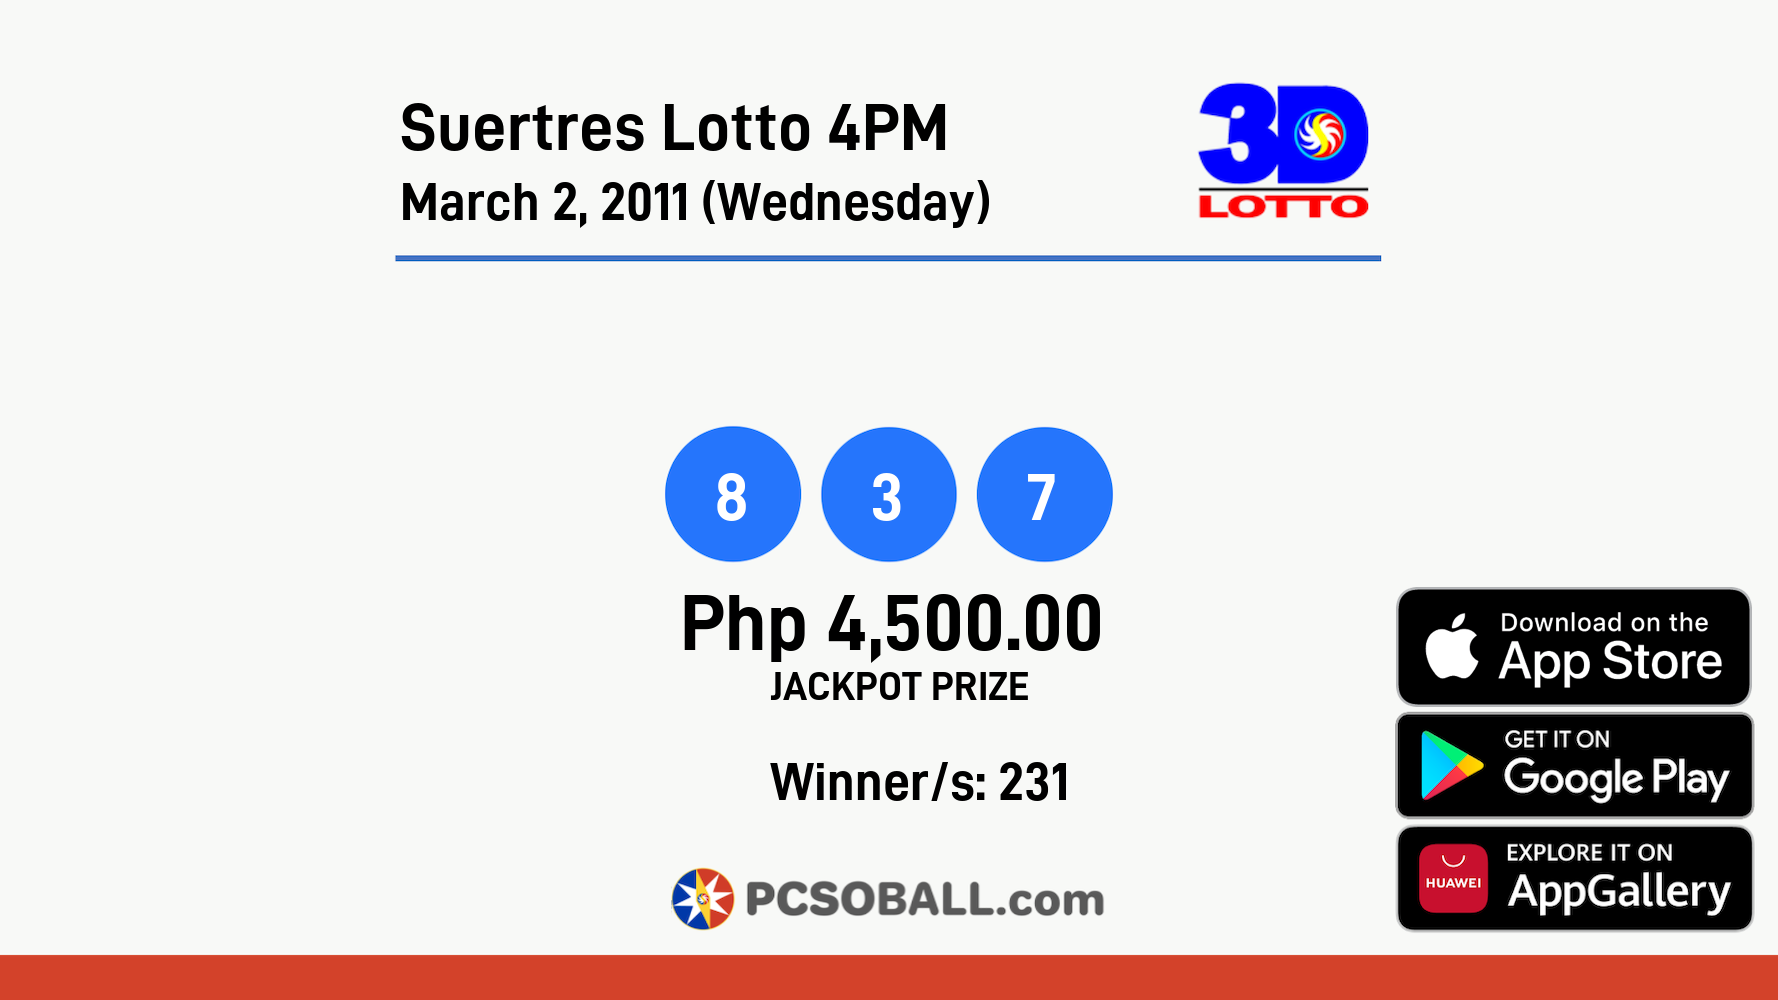 Suertres Lotto 4PM March 2, 2011 (Wednesday) Result